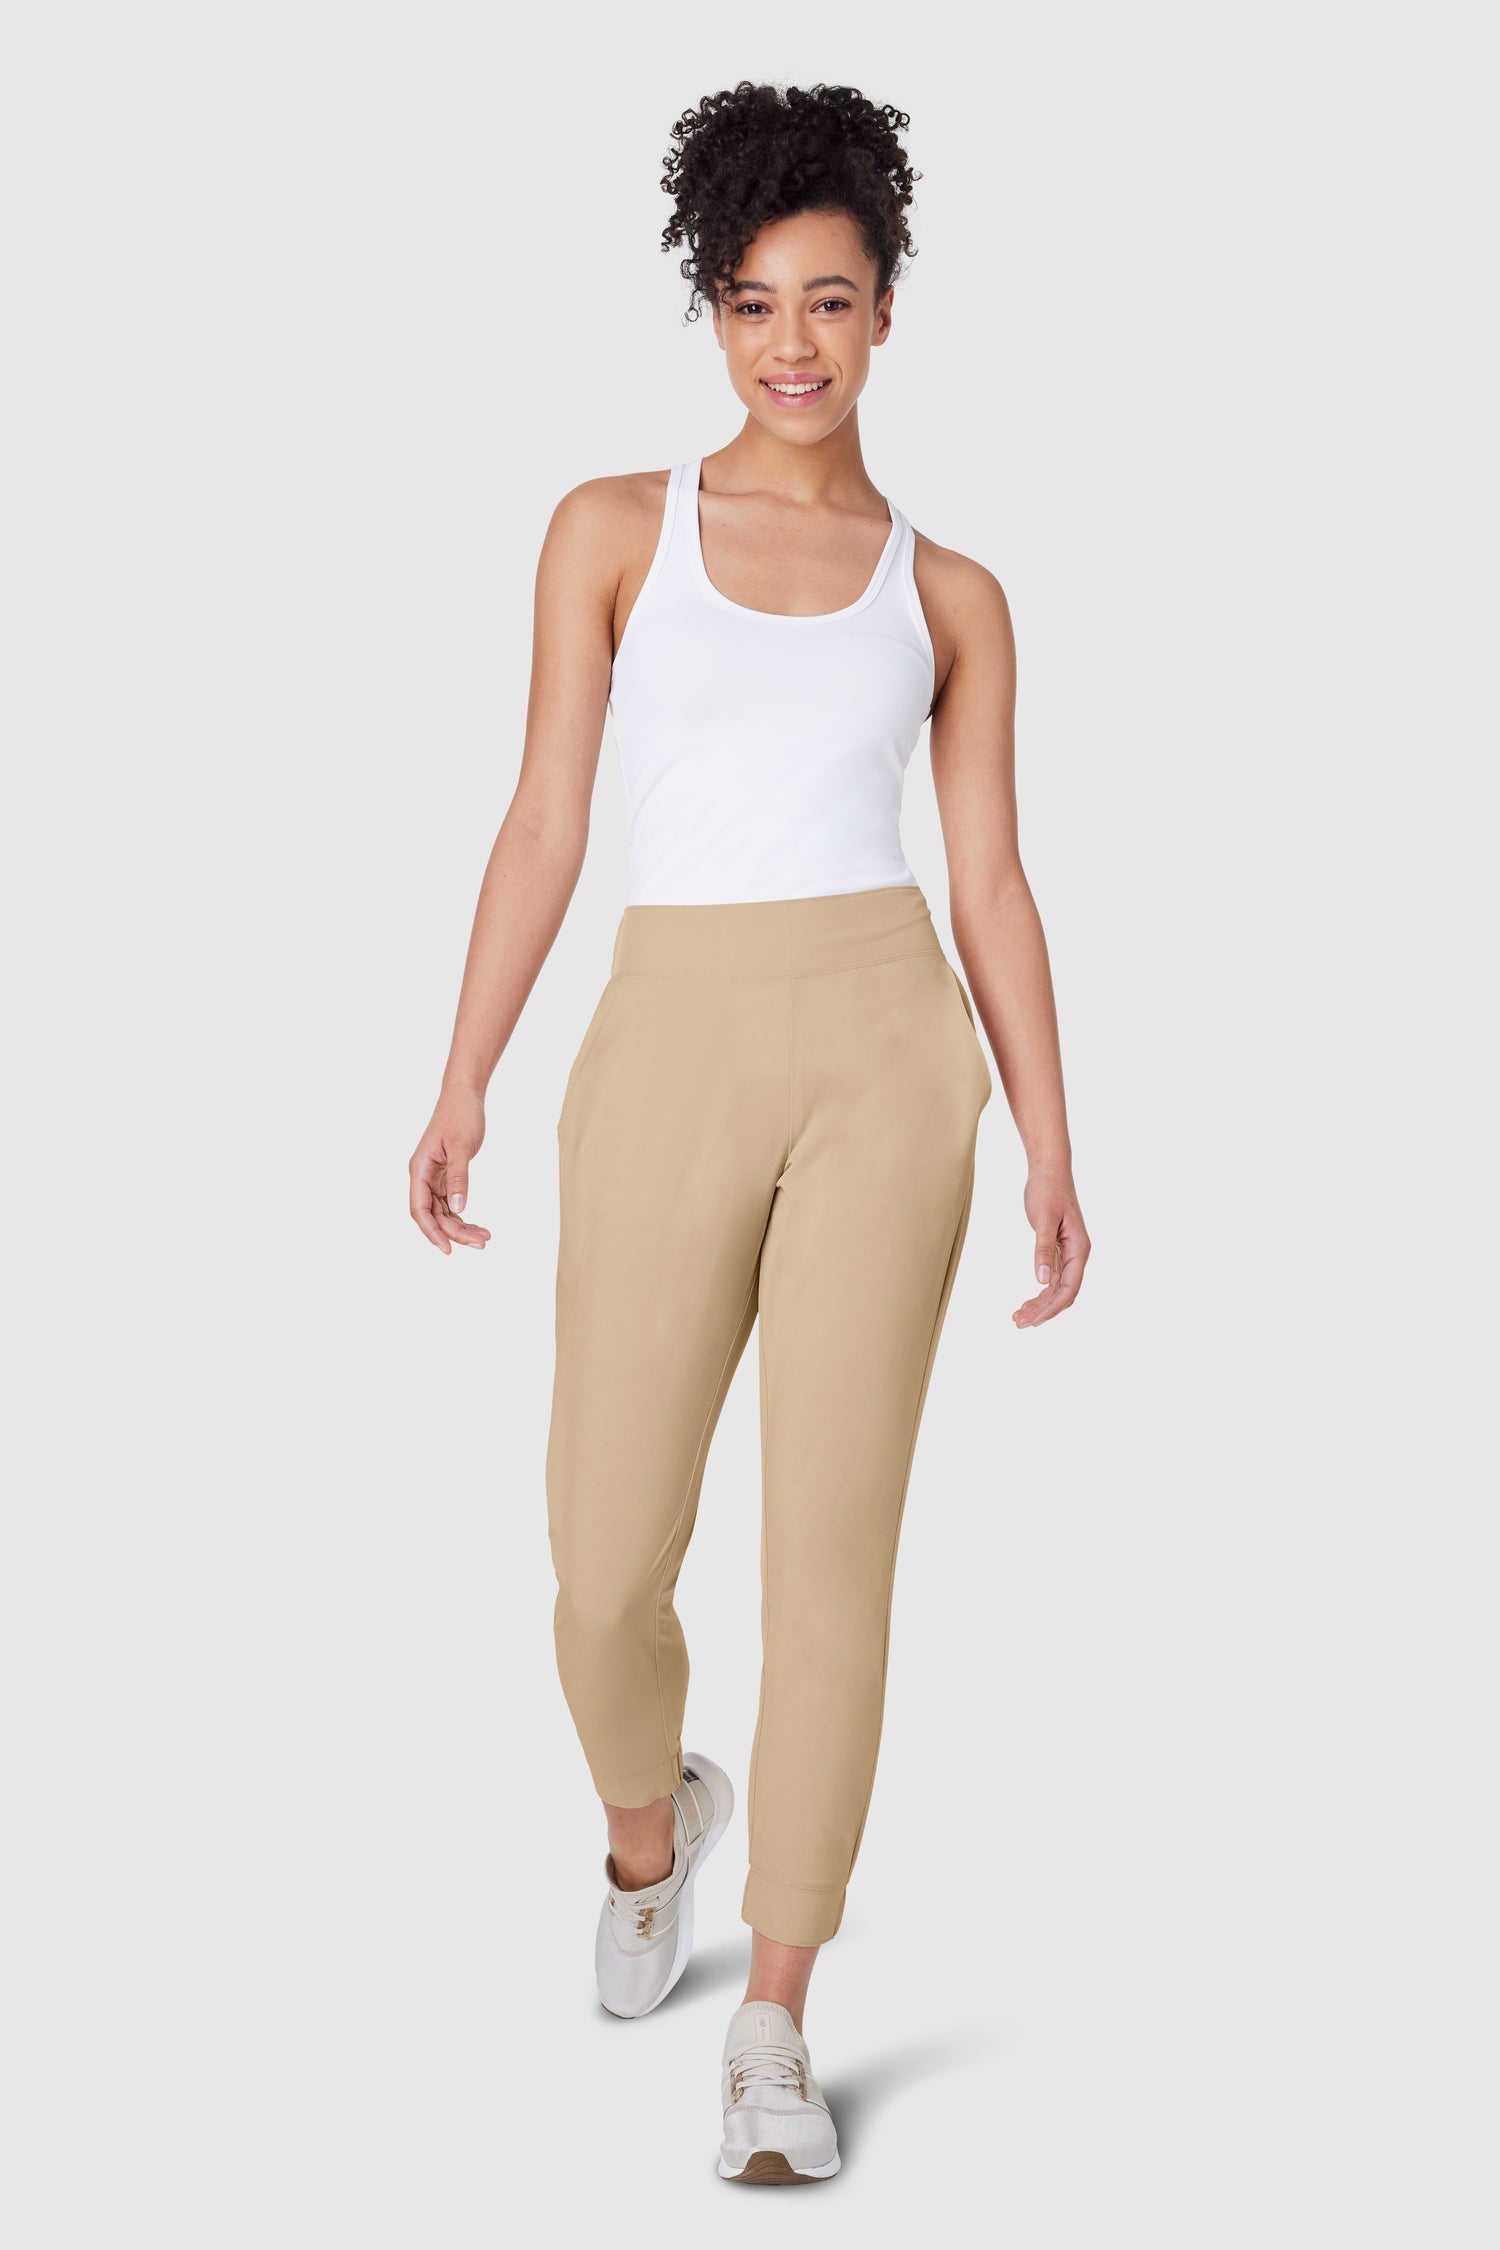 FWD Women's Core Stretch Woven Pant - BEST SELLING